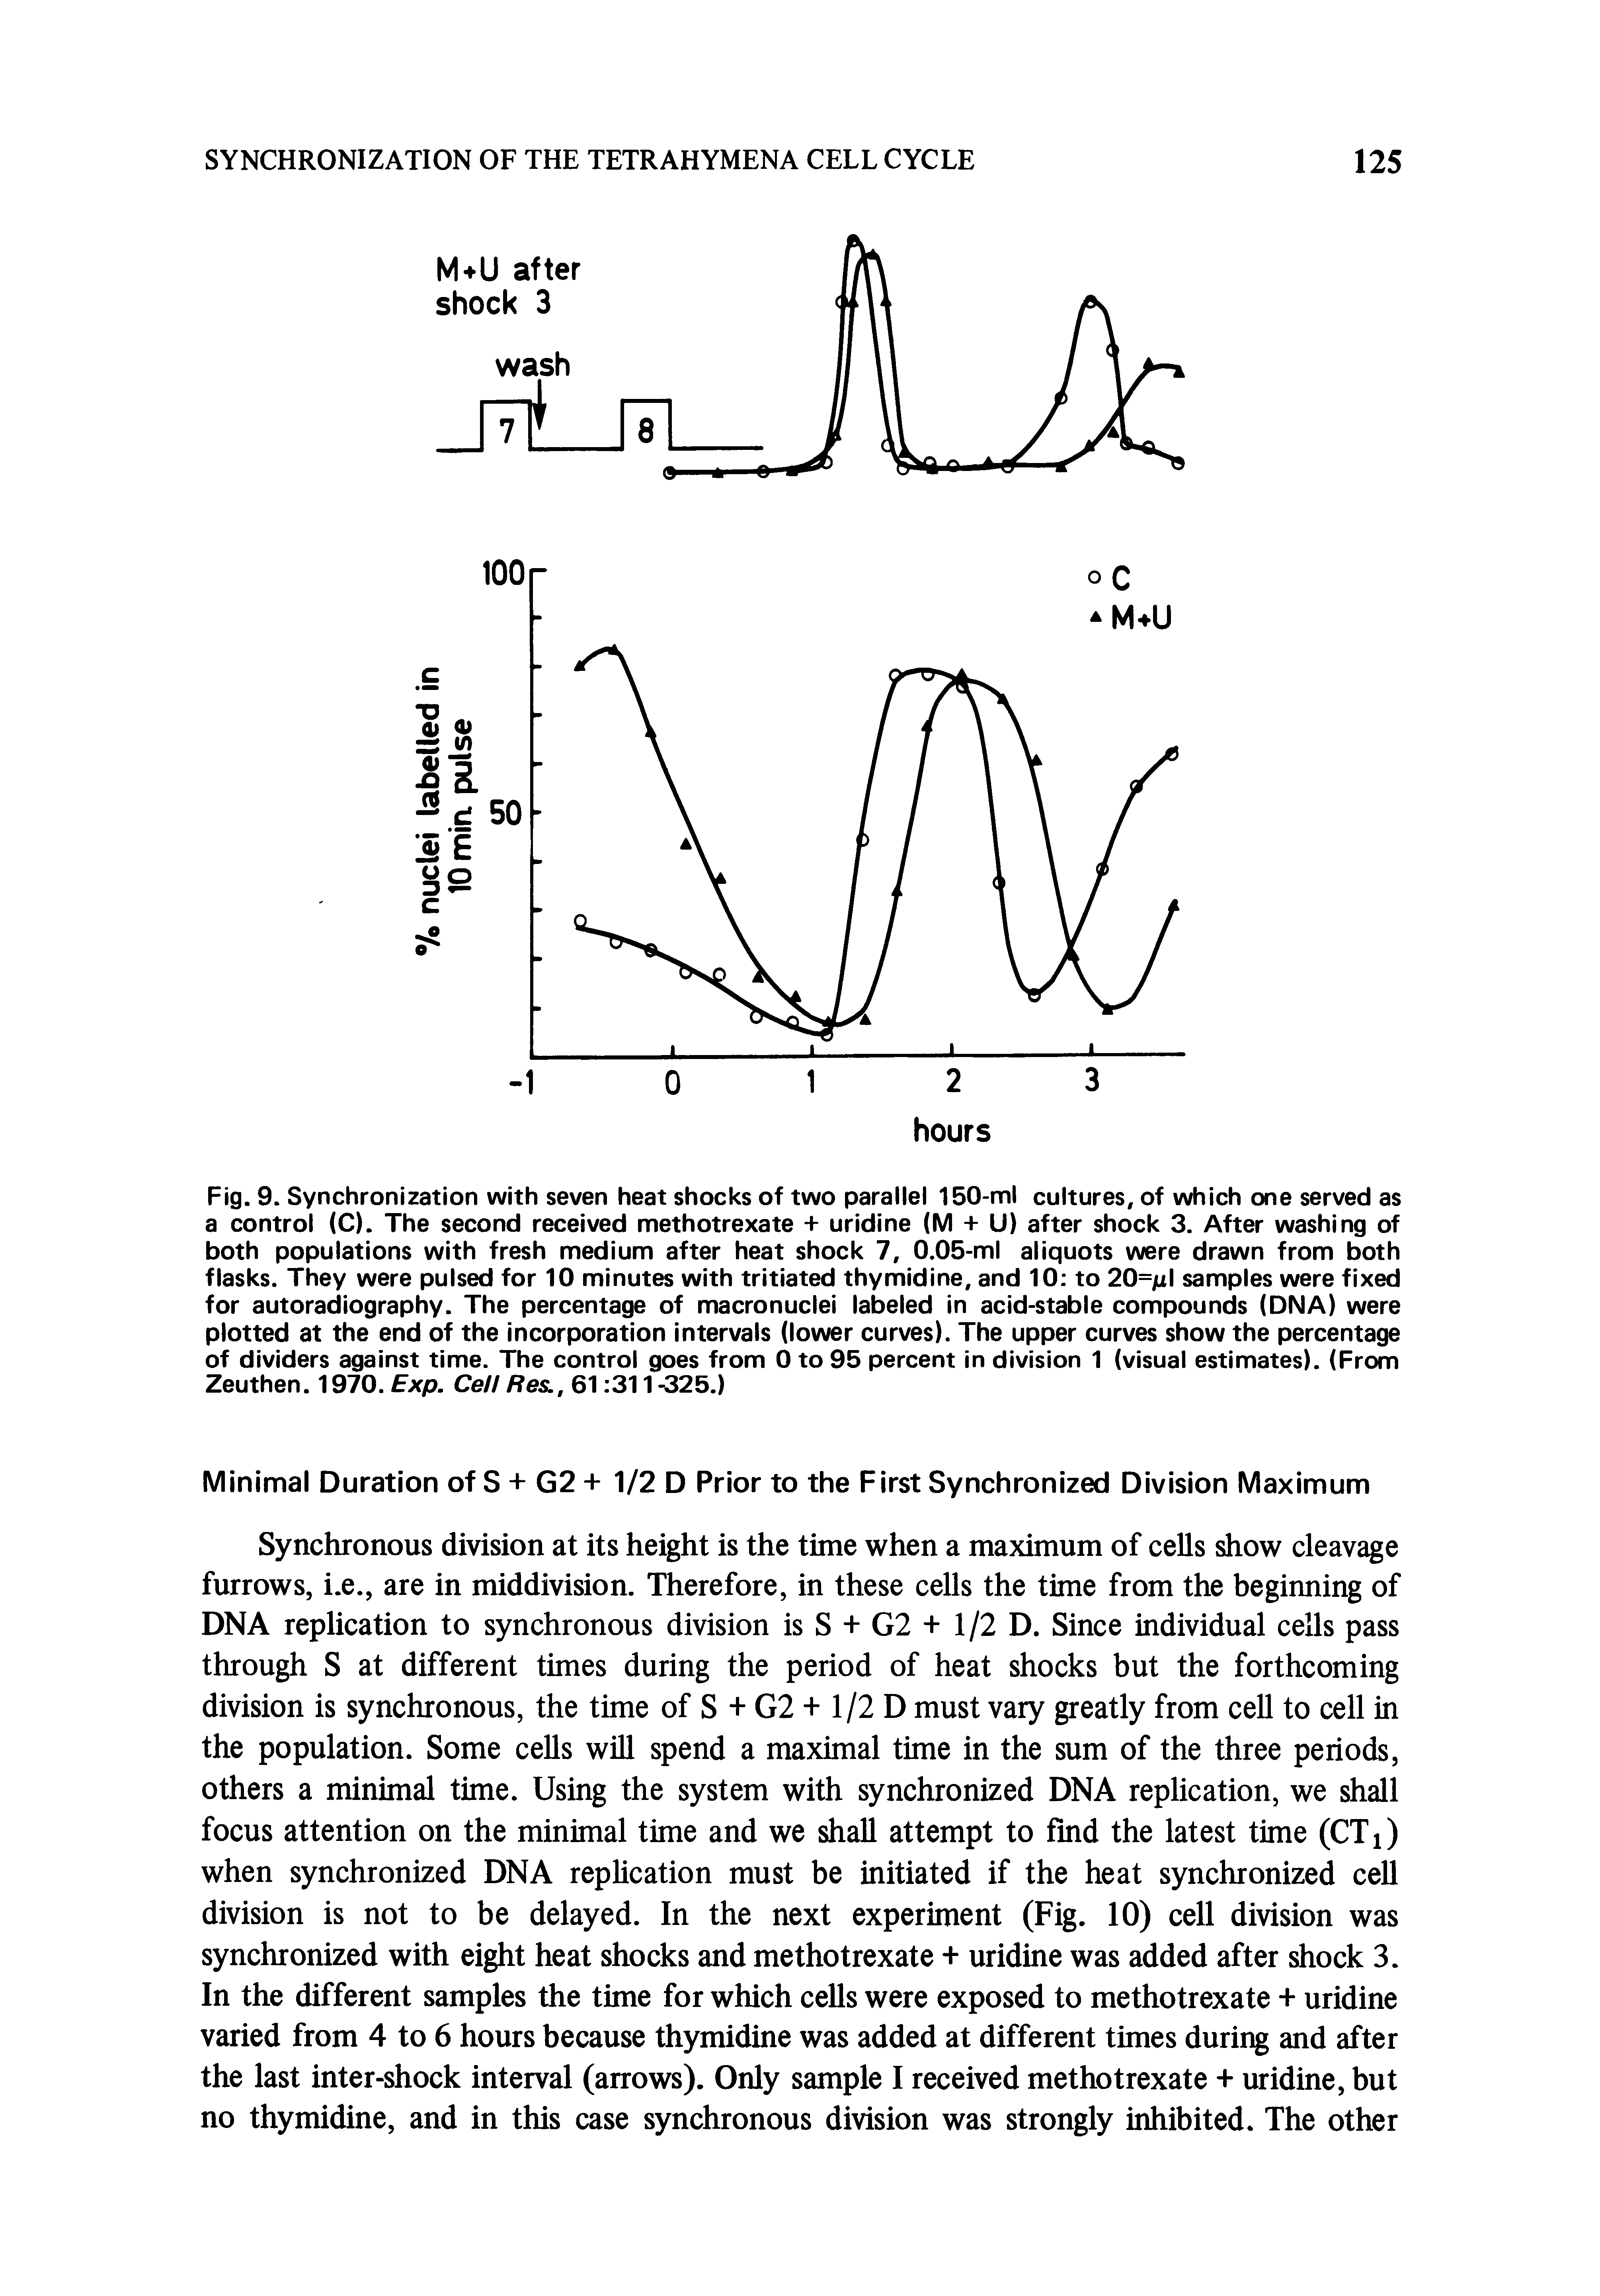 Fig. 9. Synchronization with seven heat shocks of two parallel 150-ml cultures, of which one served as a control (C). The second received methotrexate + uridine (M + U) after shock 3. After washing of both populations with fresh medium after heat shock 7, 0.05-ml aliquots were drawn from both flasks. They were pulsed for 10 minutes with tritiated thymidine, and 10 to 20=jLil samples were fixed for autoradiography. The percentage of macronuclei labeled in acid-stable compounds (DNA) were plotted at the end of the incorporation intervals (lower curves). The upper curves show the percentage of dividers against time. The control goes from 0 to 95 percent in division 1 (visual estimates). (From Zeuthen. 1970. Exp. Cell Res., 61 311 -325.)...